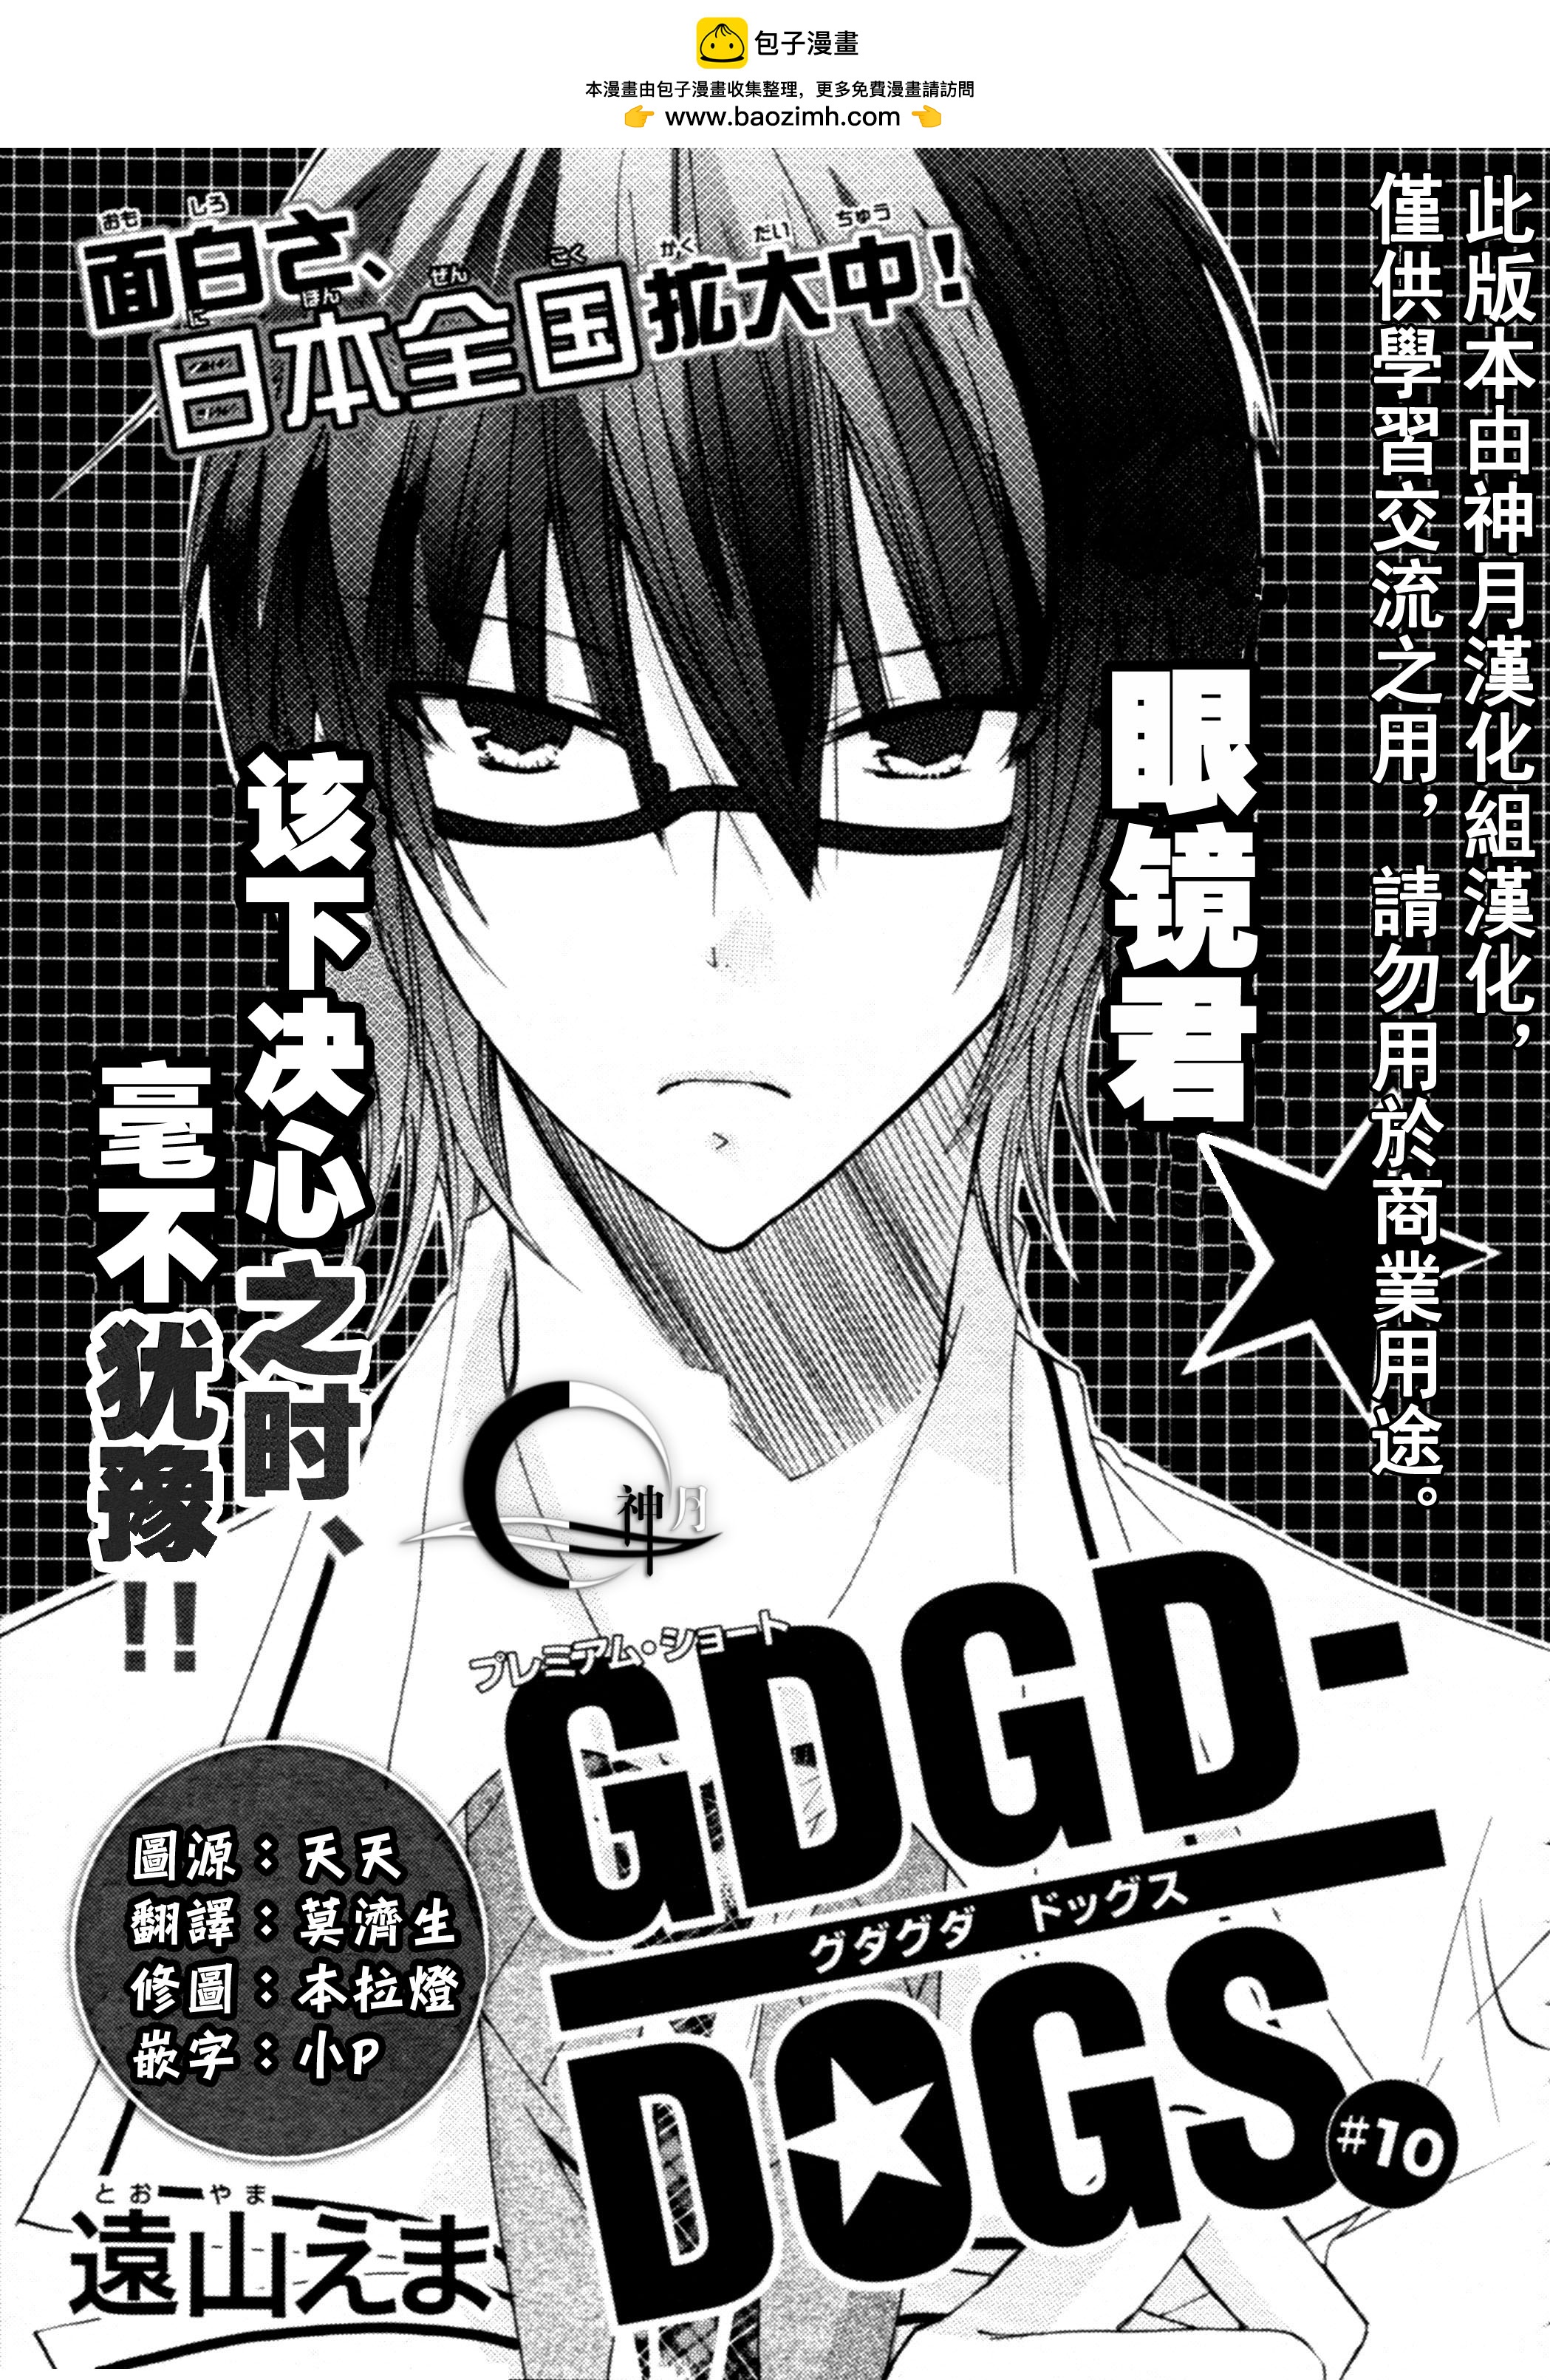 GDGD-DOGS - 第10話 - 1